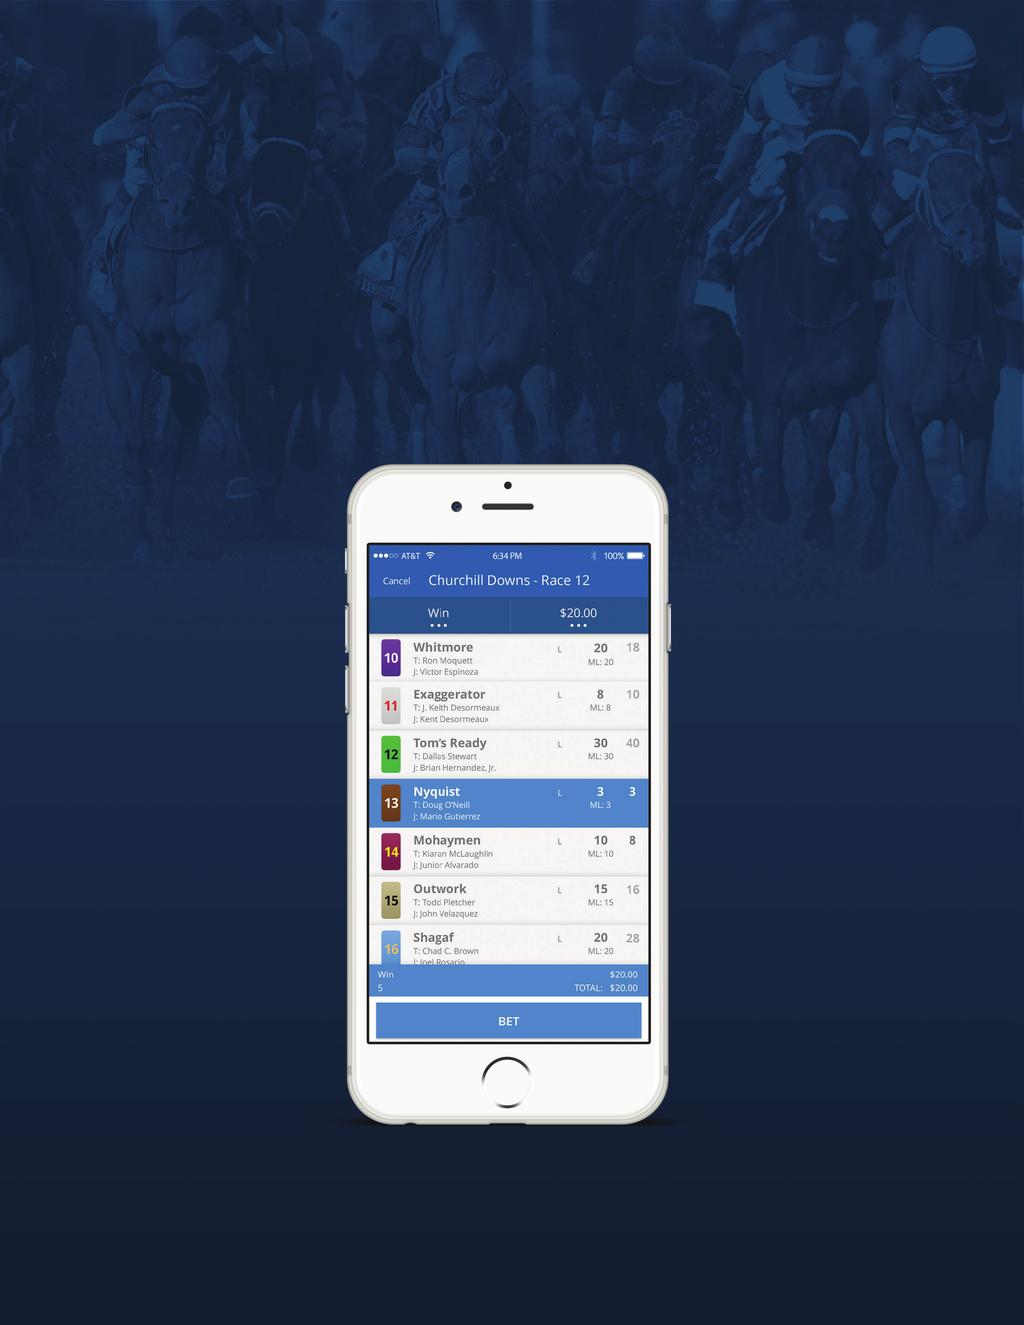 BET ANYWHERE! DOWNLOAD THE TWINSPIRES APP SIGN UP FOR A $100 BONUS!